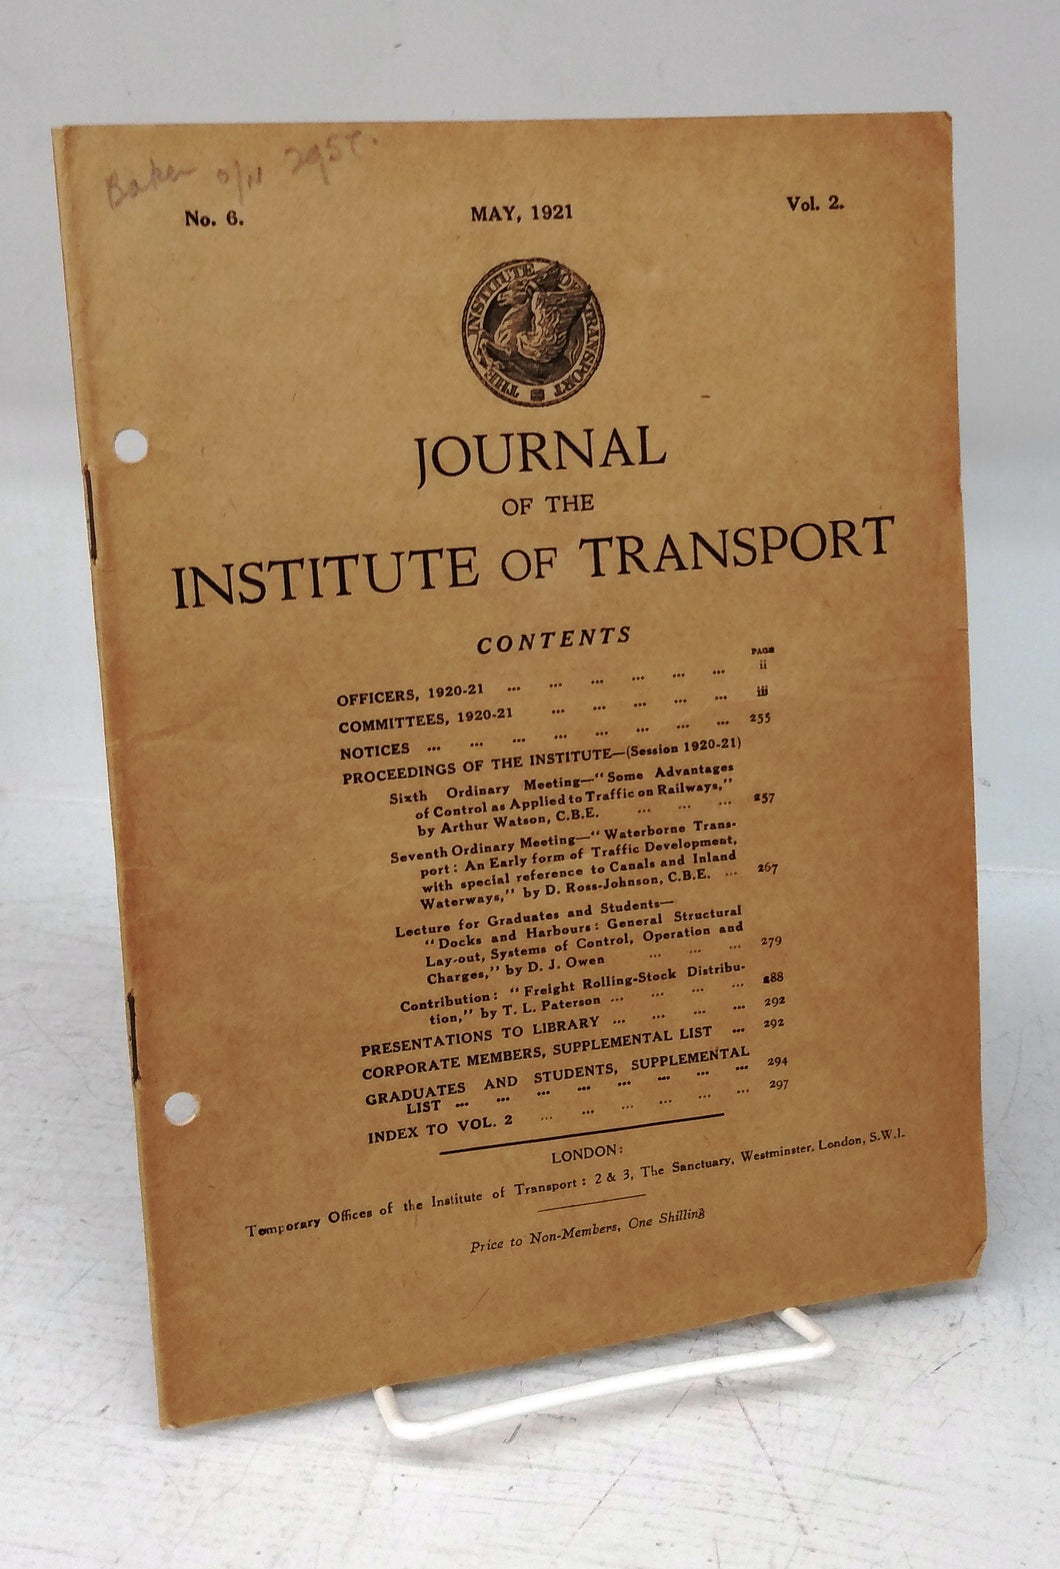 Journal of the Institute of Transport, May 1921